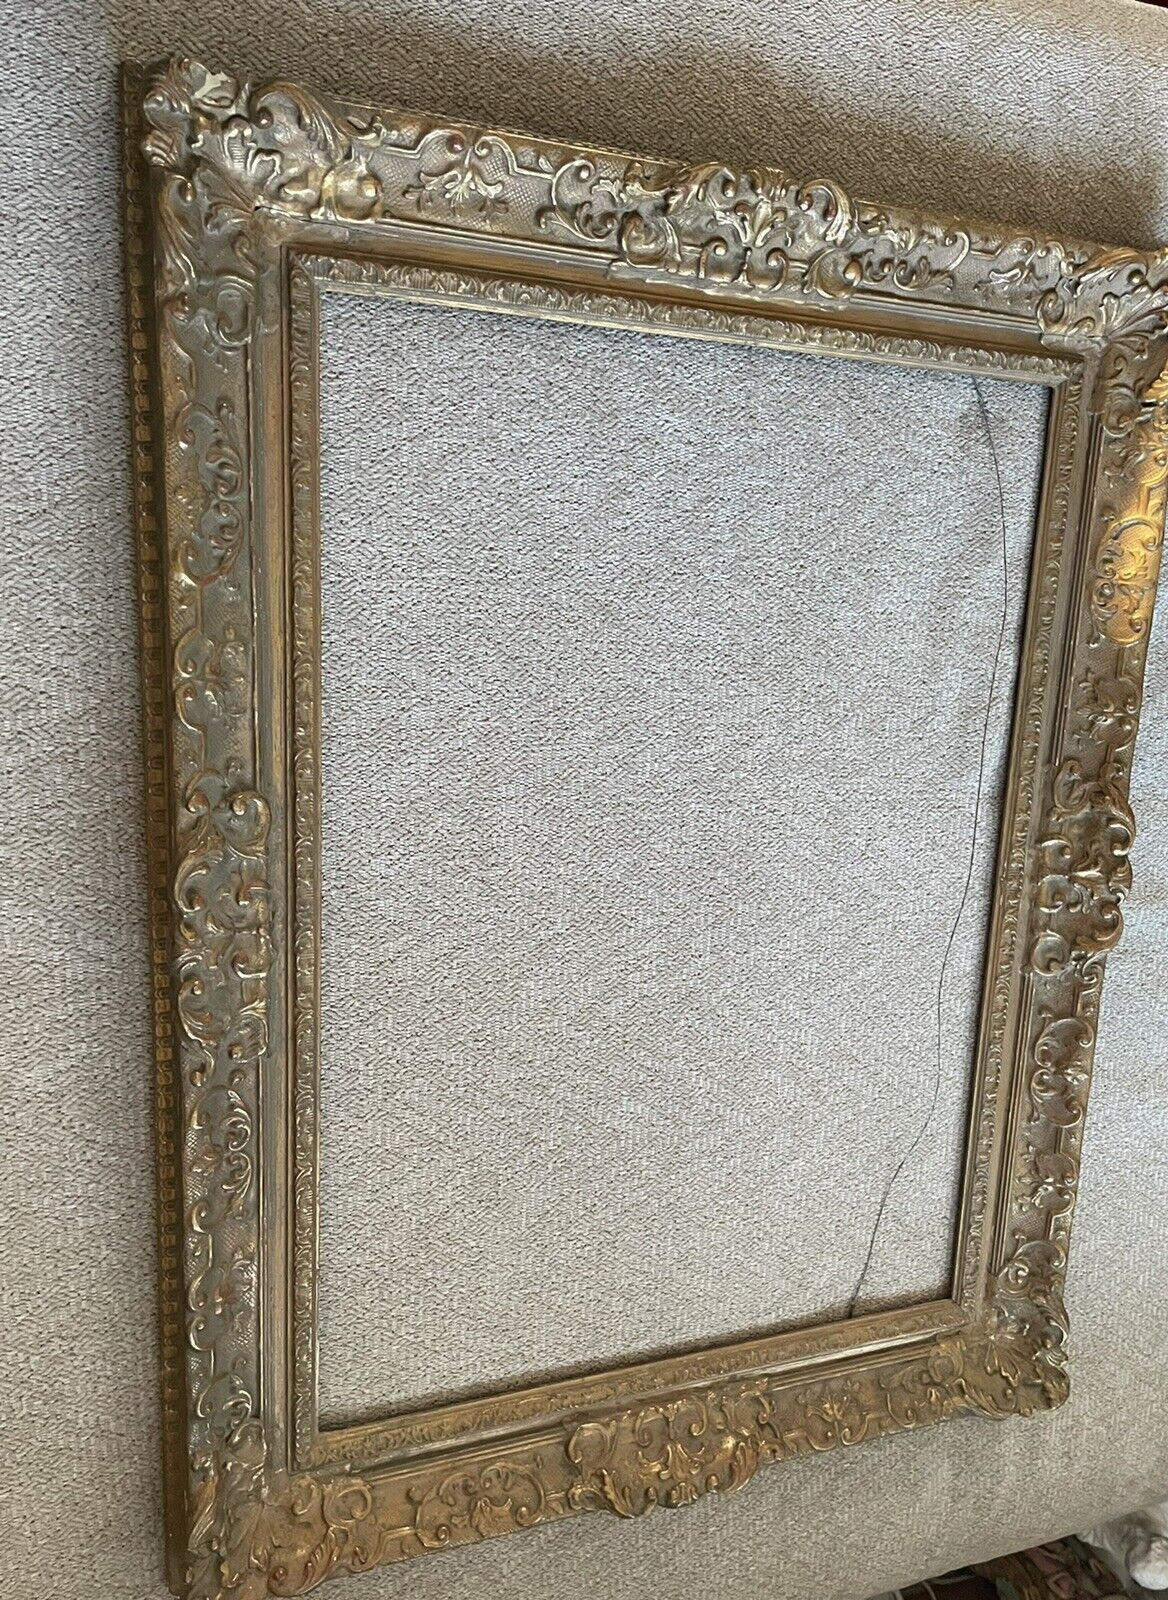 c1800’s Excellent American Solid Heavily Adorned Gold Maple Art Lg Frame 36 x 28